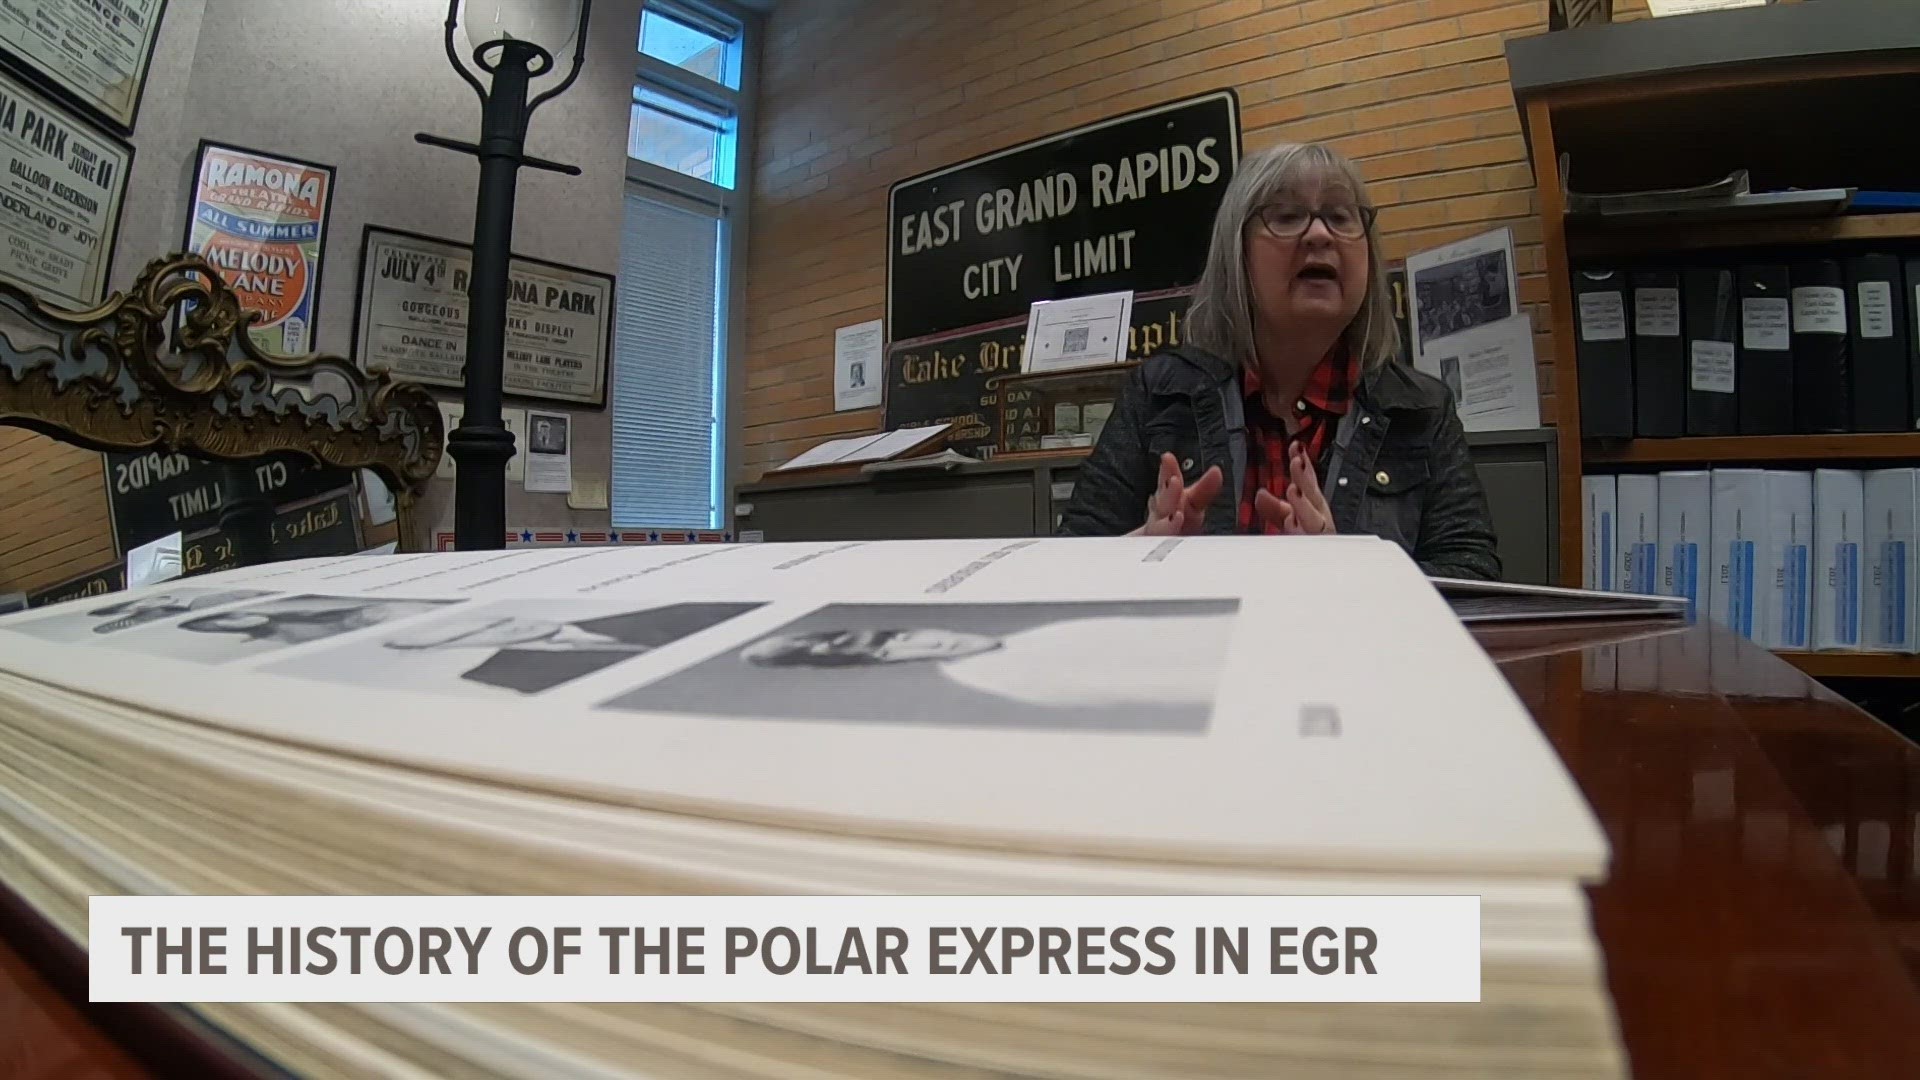 You can find many connections to West Michigan in Chris Van Allsburg's The Polar Express.